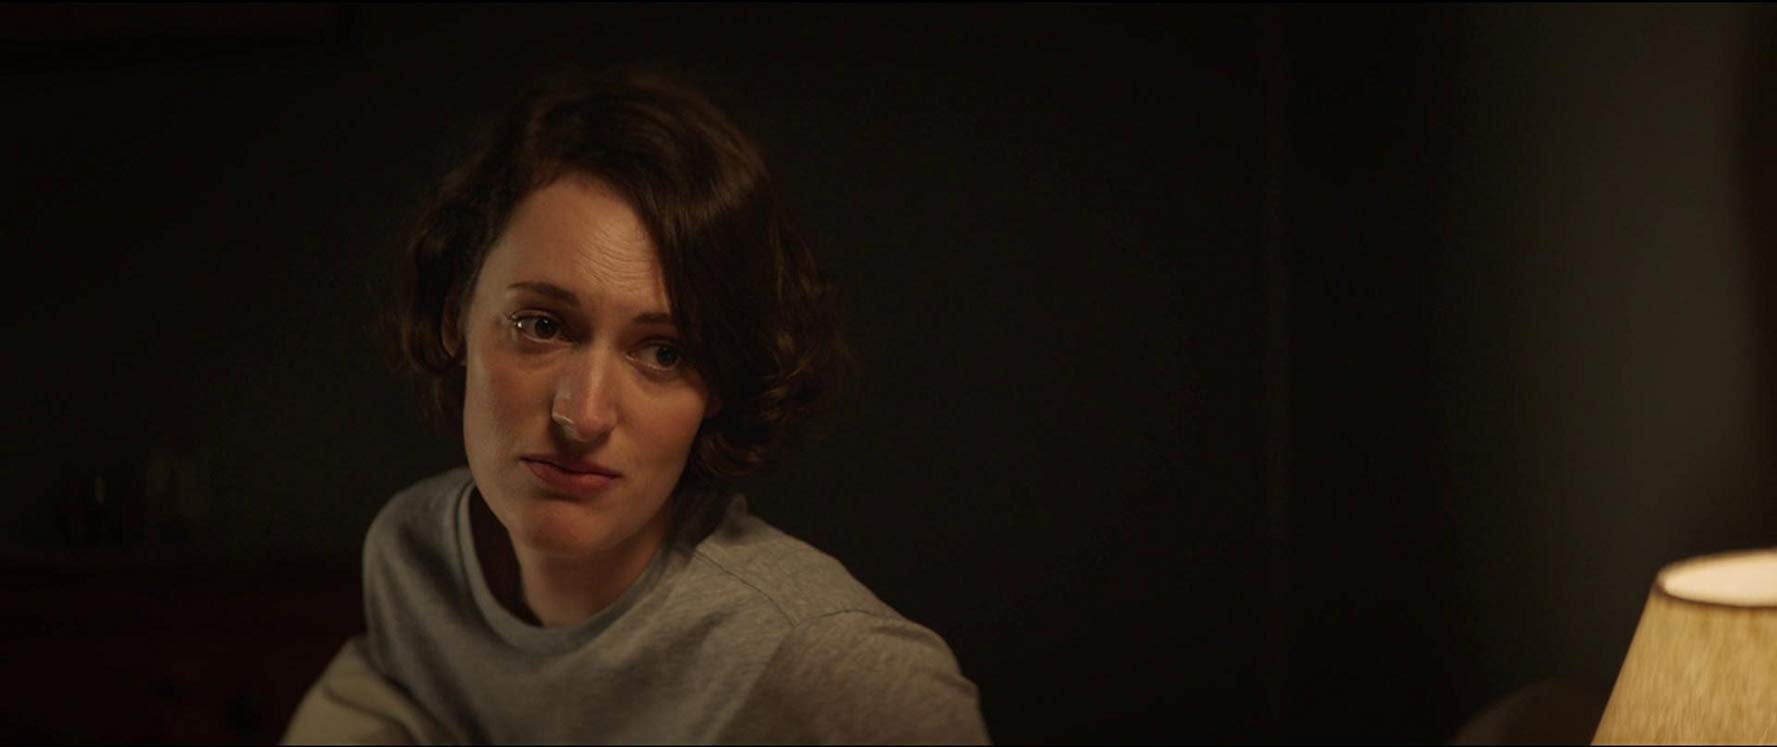 Image of woman from the TV series, Fleabag